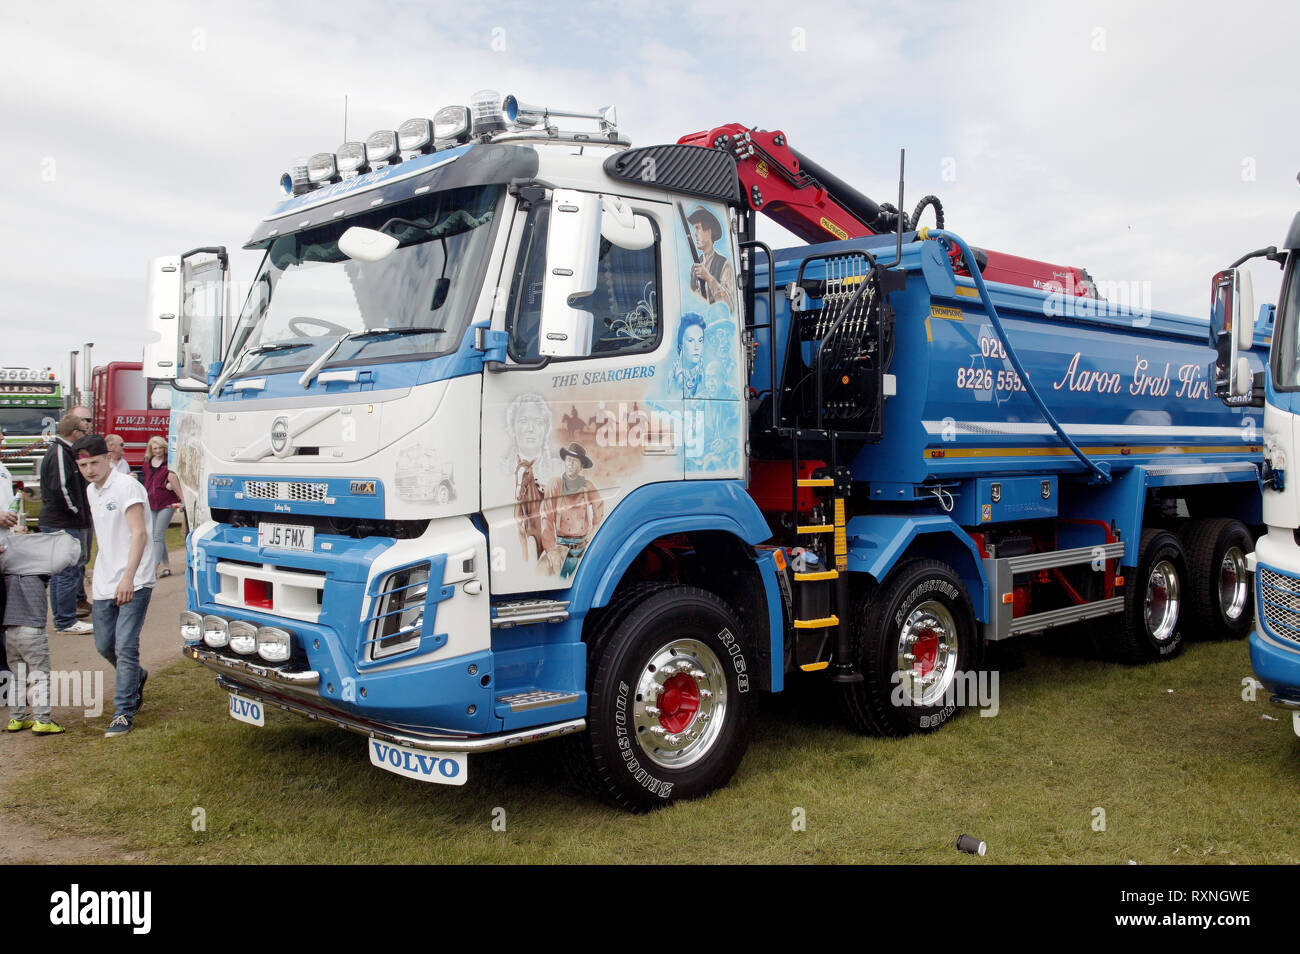 Volvo Pits 10,000-Pound FMX Truck Against Sophie, a Four-Year-Old [Video] –  News – Car and Driver